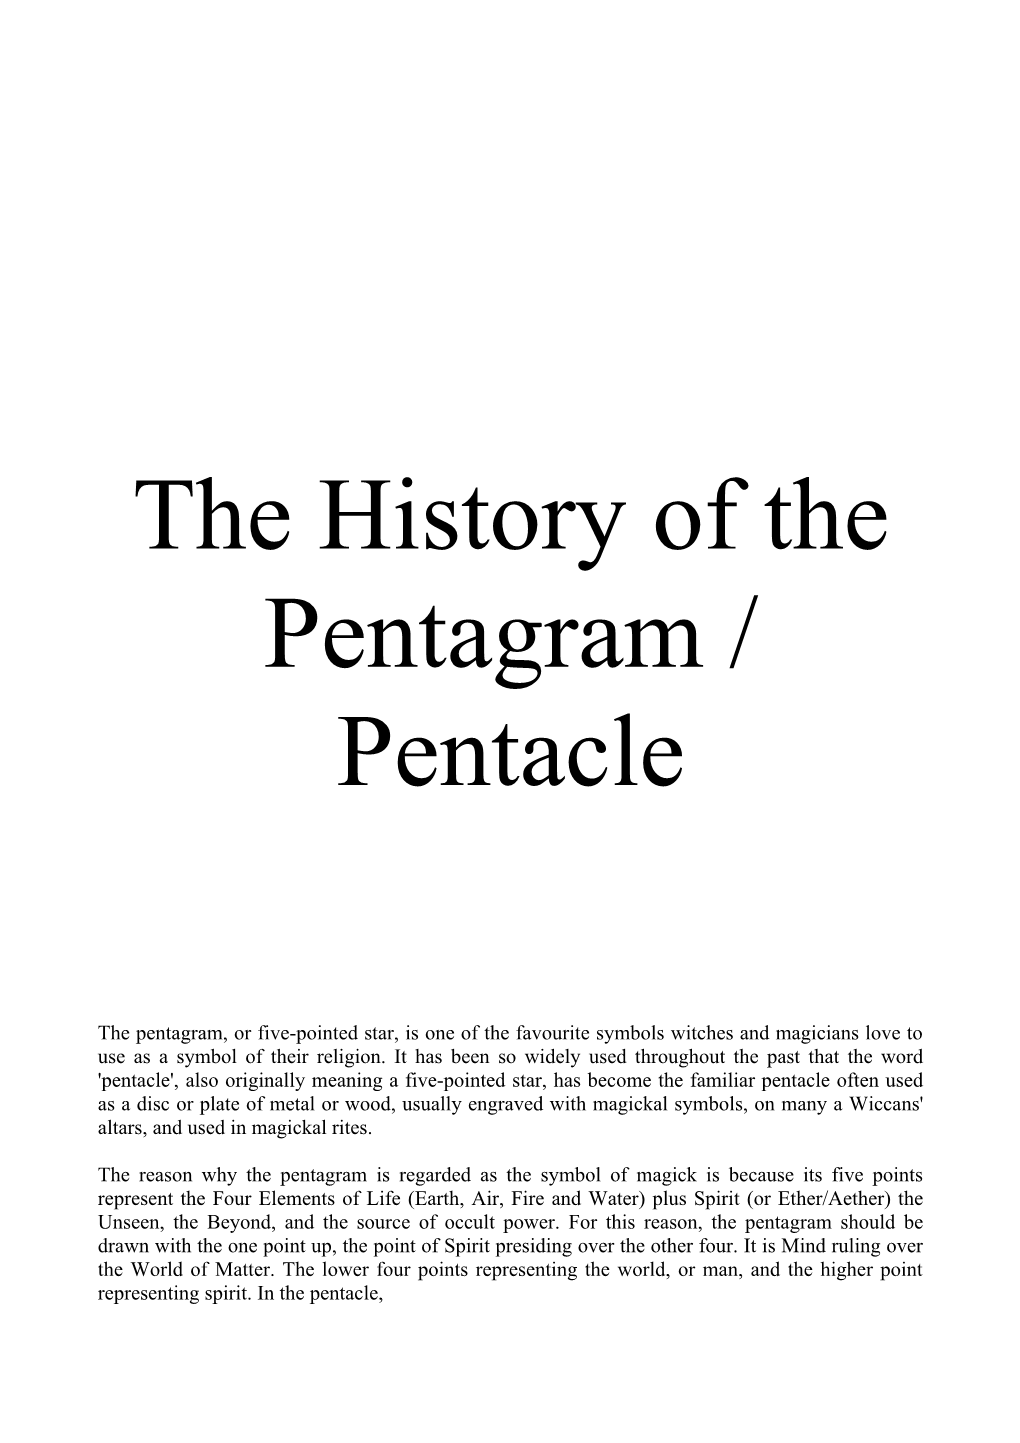 The History of the Pentagram / Pentacle